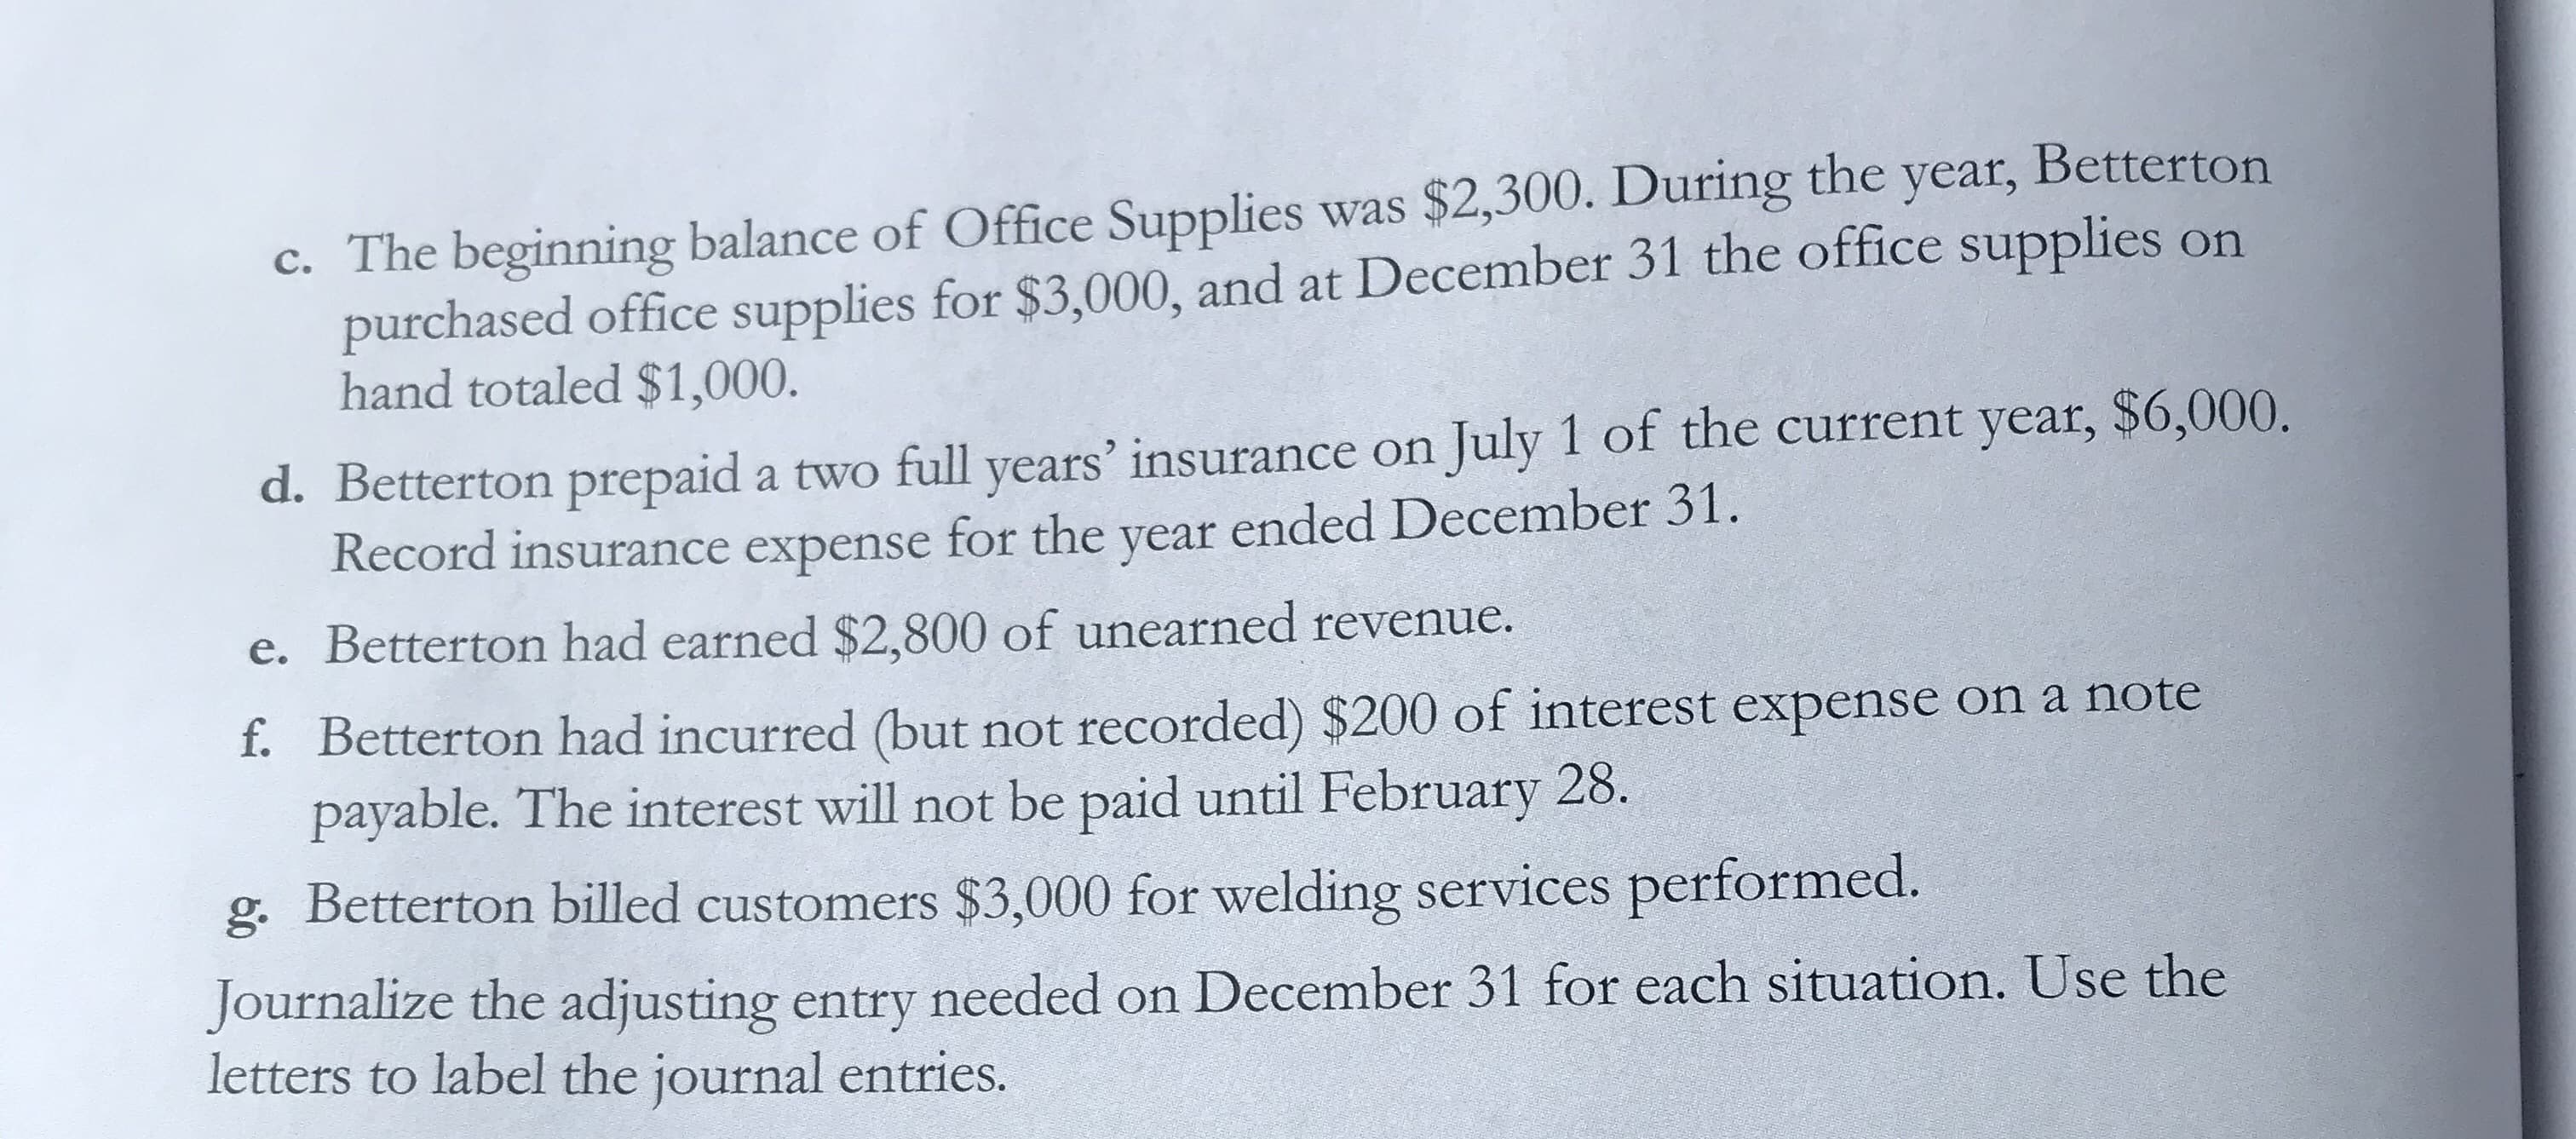 c. The beginning balance of Office Supplies was $2,300. During the year, Betterton
purchased office supplies for $3,000, and at December 31 the office supplies on
hand totaled $1,000.
d. Betterton prepaid a two full years' insurance on July 1 of the current year, $6,000.
Record insurance expense for the year ended December 31.
e. Betterton had earned $2,800 of unearned revenue.
f. Betterton had incurred (but not recorded) $200 of interest expense on a note
payable. The interest will not be paid until February 28.
g. Betterton billed customers $3,000 for welding services performed.
Journalize the adjusting entry needed on December 31 for each situation. Use the
letters to label the journal entries.
